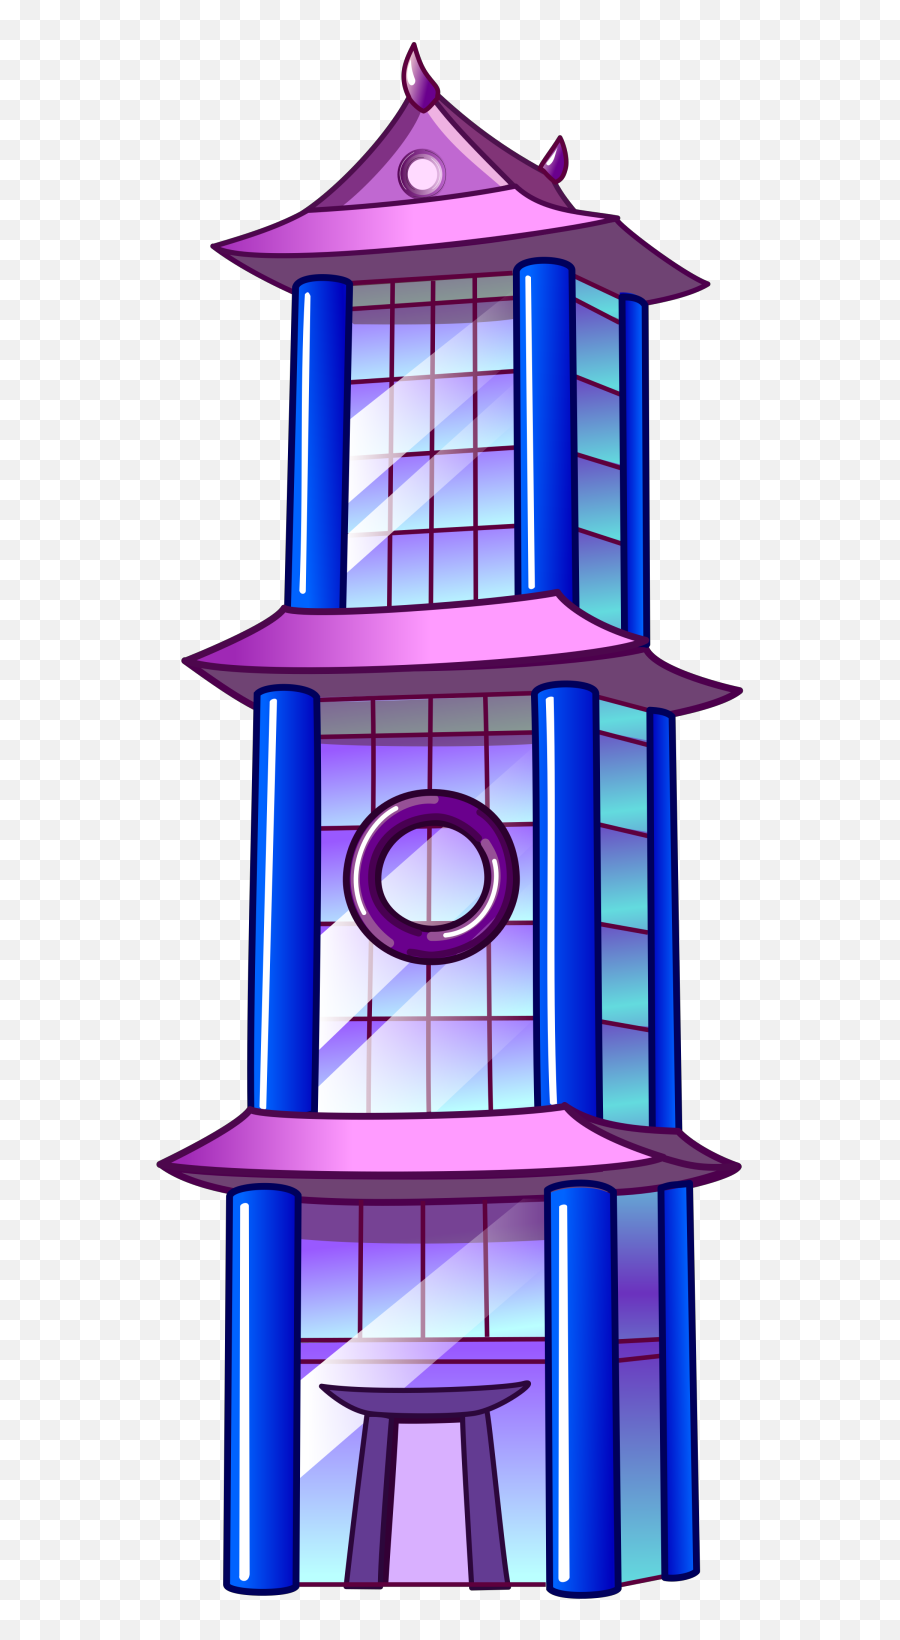 Skyscrapers And Their Roofs Png Svg Clip Art For Web - Vertical Emoji,Kylie Jenner Tiger Emoji